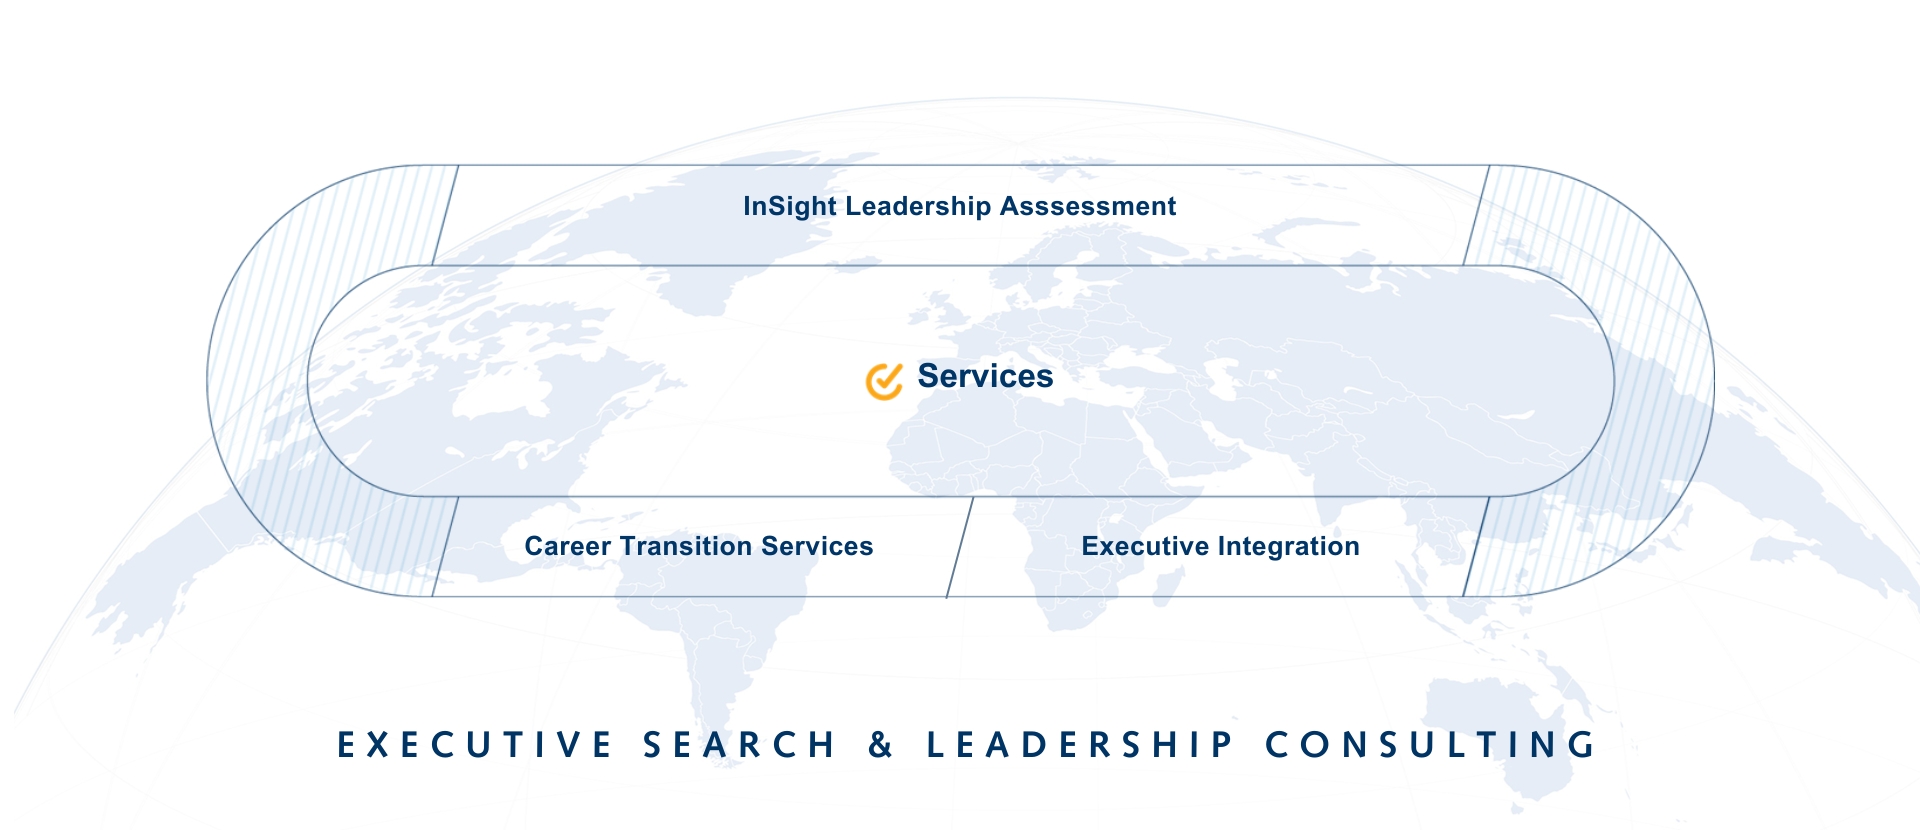 Leadership Consulting Services